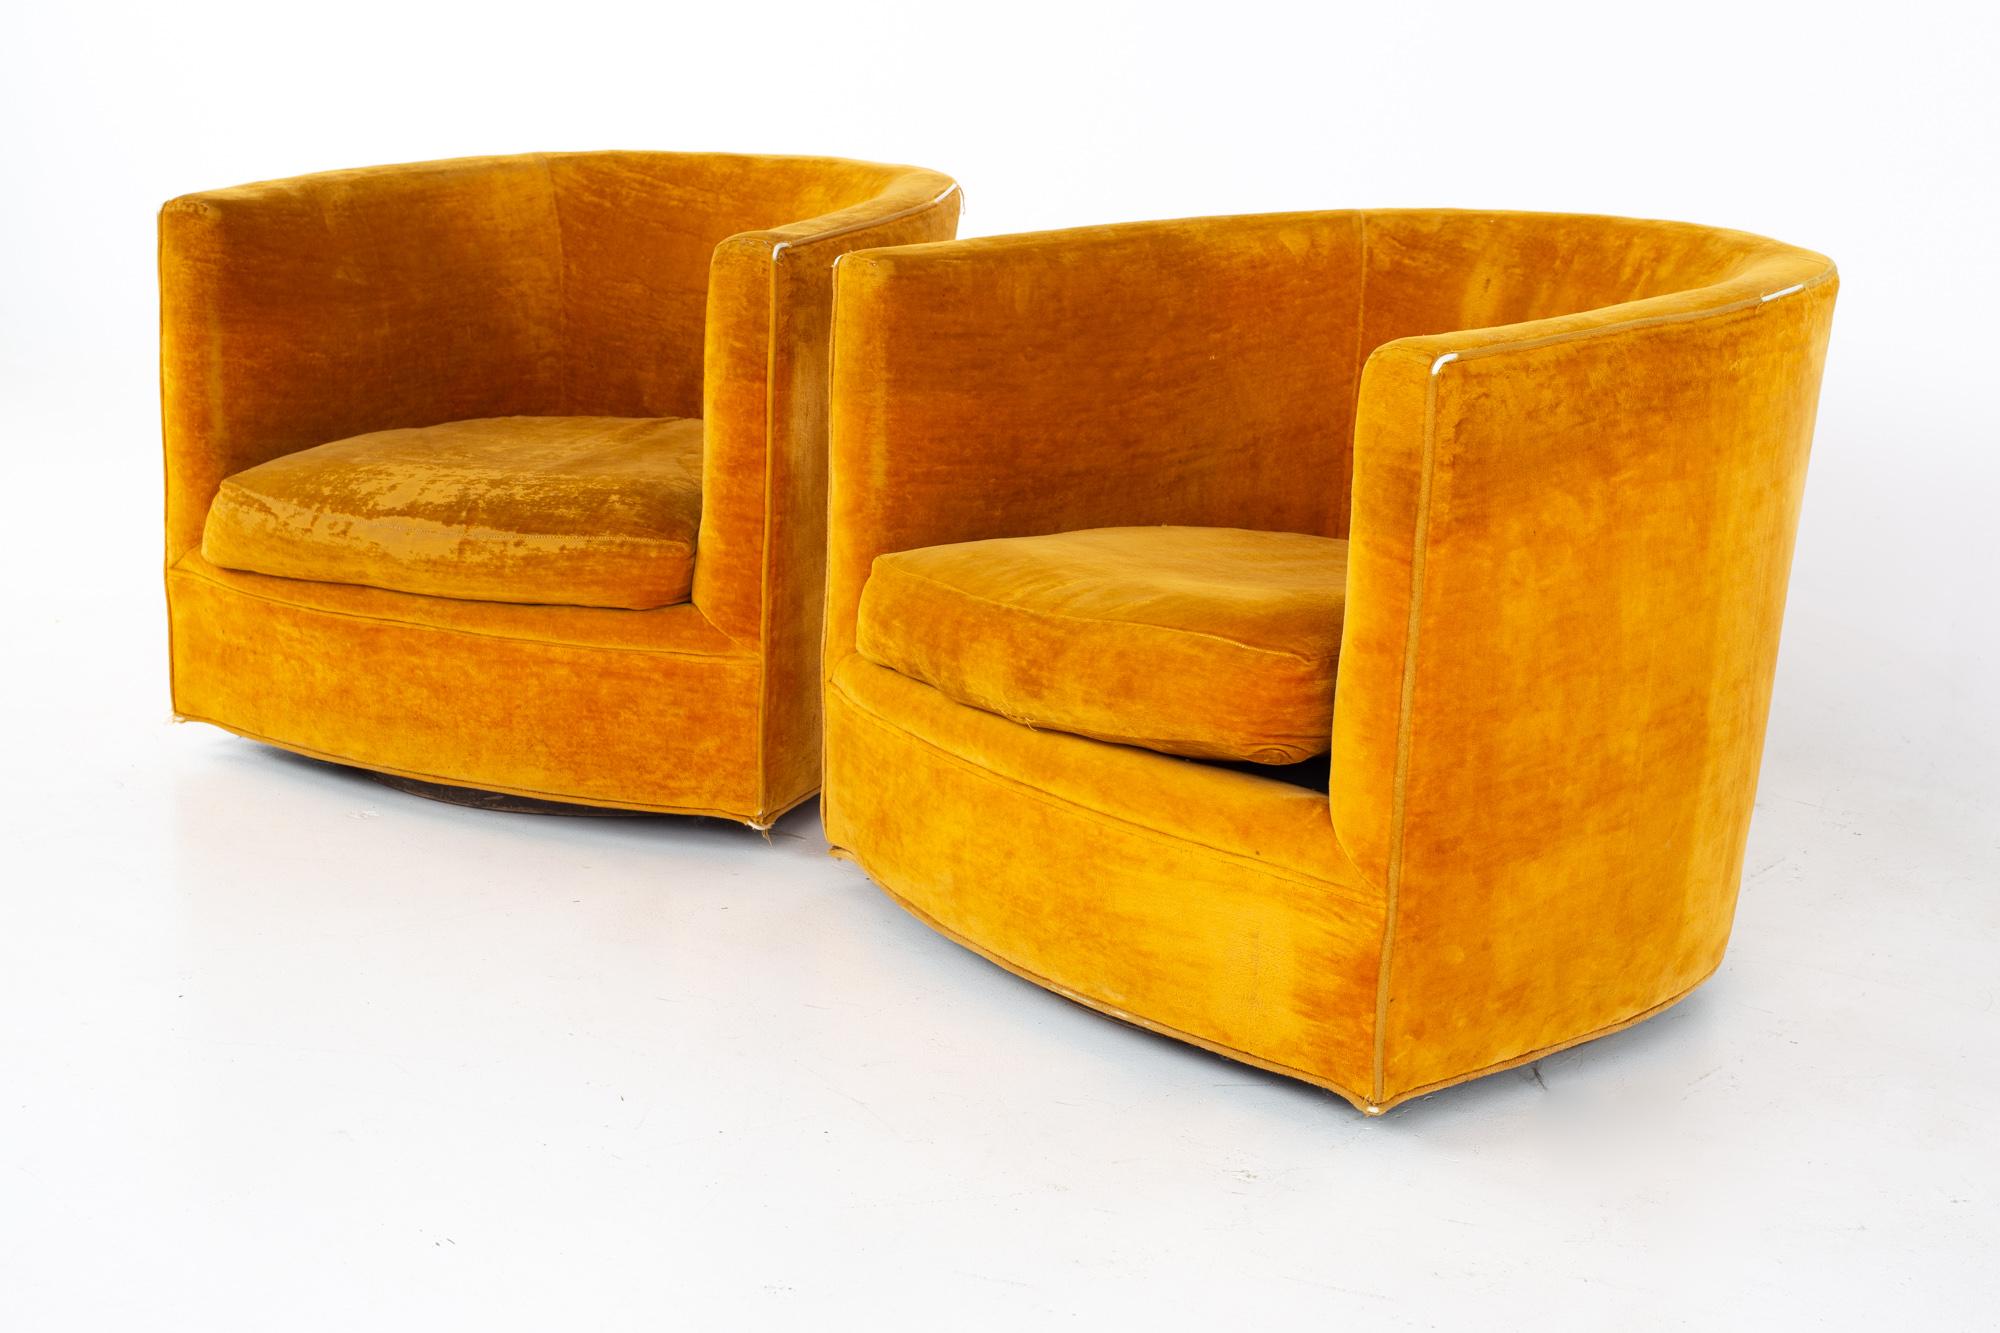 Milo Baughman style mid century barrel swivel lounge chairs - a pair.
Each chair measures: 28.5 wide x 31 deep x 24.5 high, with a seat height of 13.5 inches 
Ready for new upholstery

All pieces of furniture can be had in what we call restored